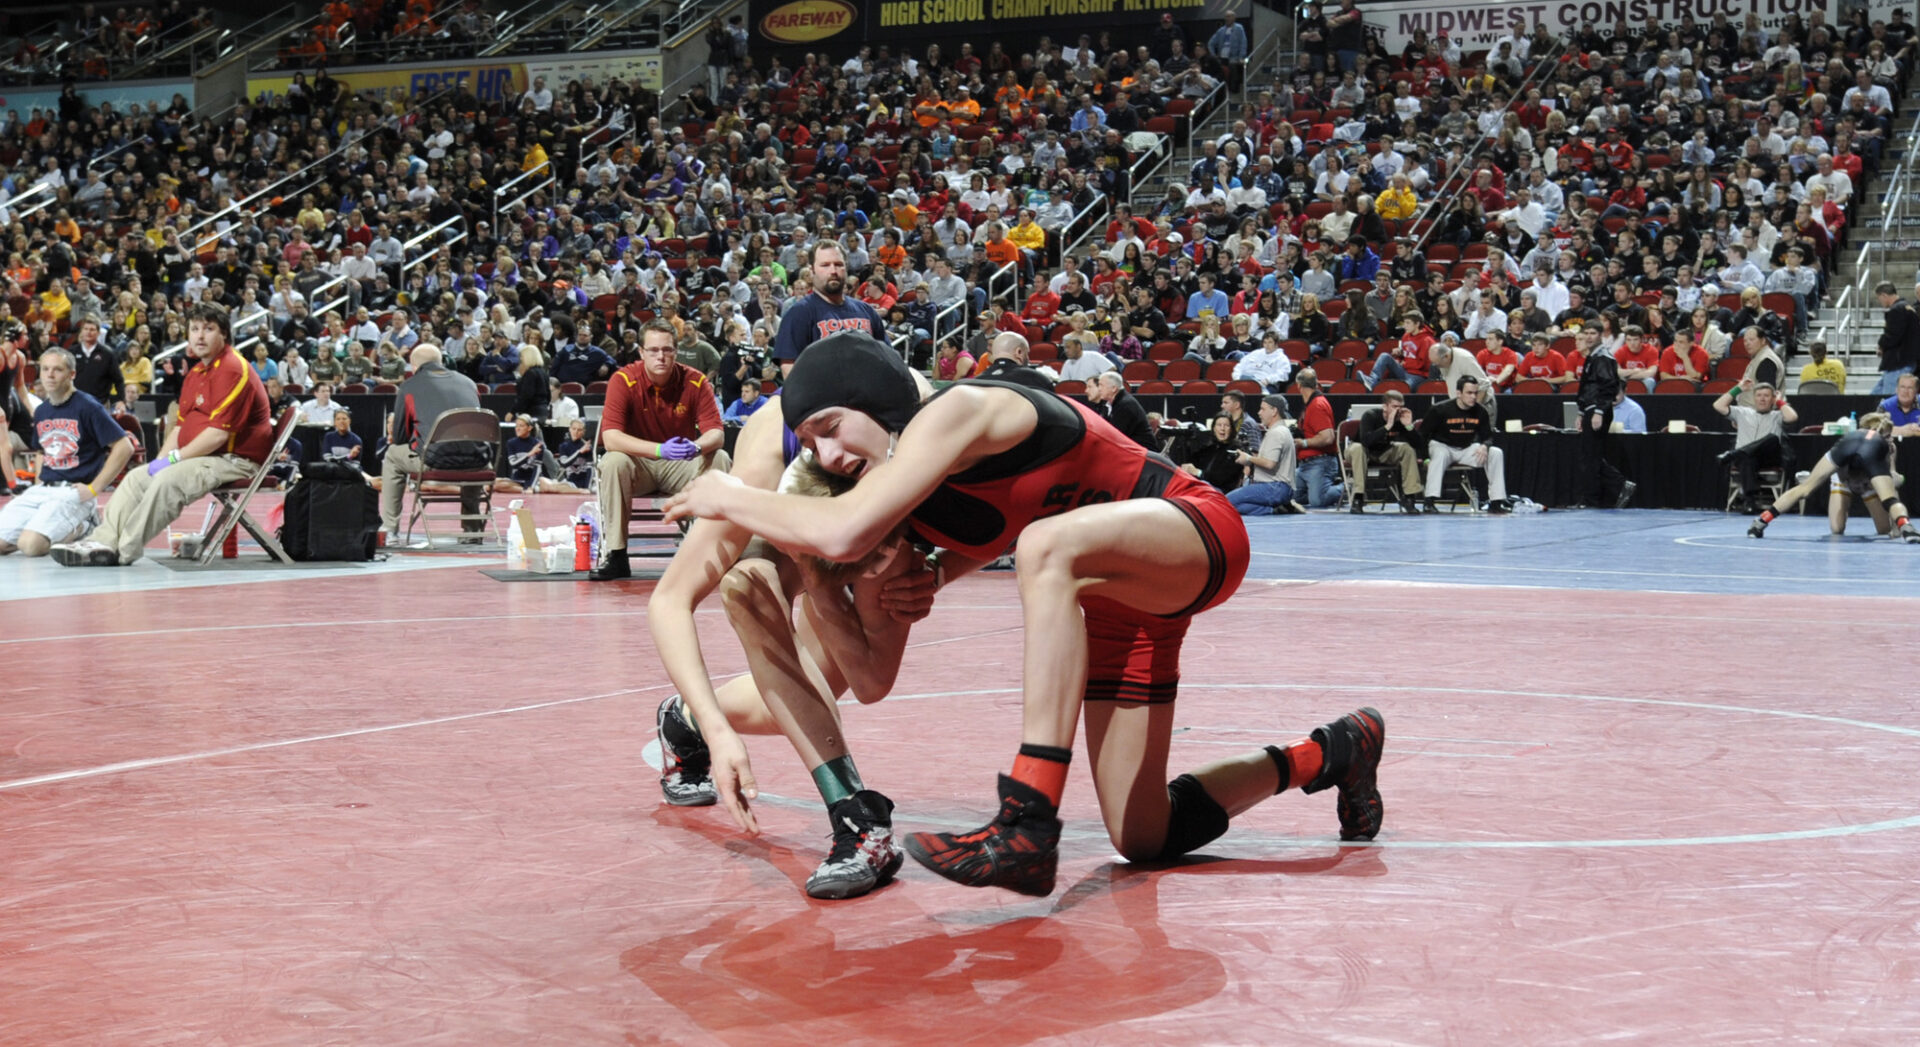 Cassy Herkelman of Cedar Falls, right, wrestles Matt Victor of Indianola in a 112-pound Class 3A quarterfinal match Friday, February 18, 2011 in Des Moines, Iowa.  Herkelman lost 5-1 to Victor on points.  (AP Photo/Steve Pope)